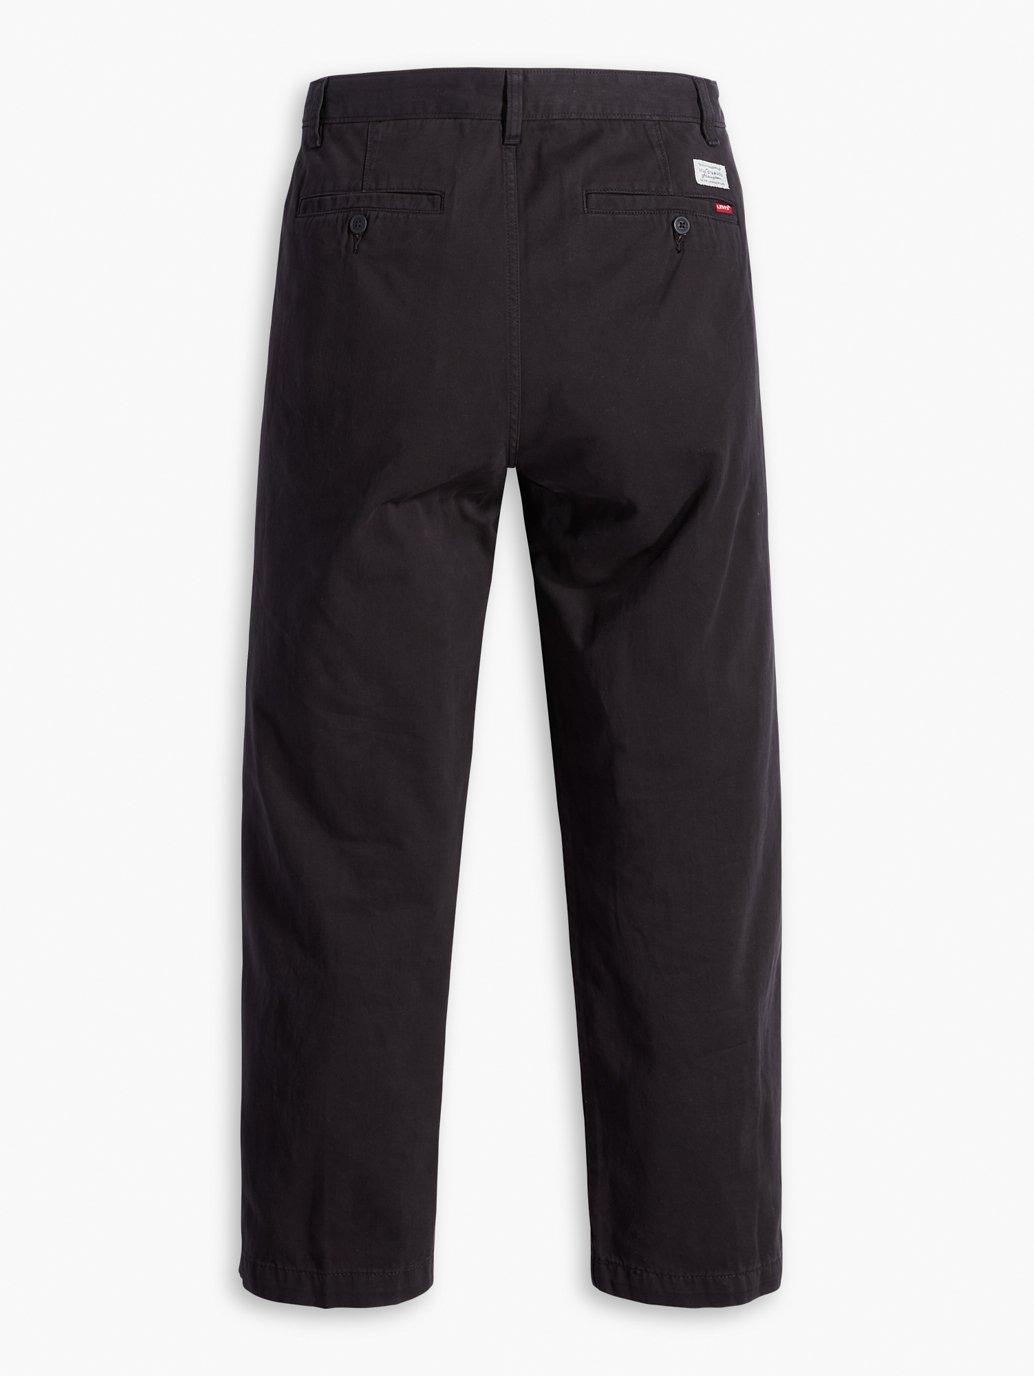 Buy Levi's® Men's XX Stay Loose Chino Pants | Levi's Official